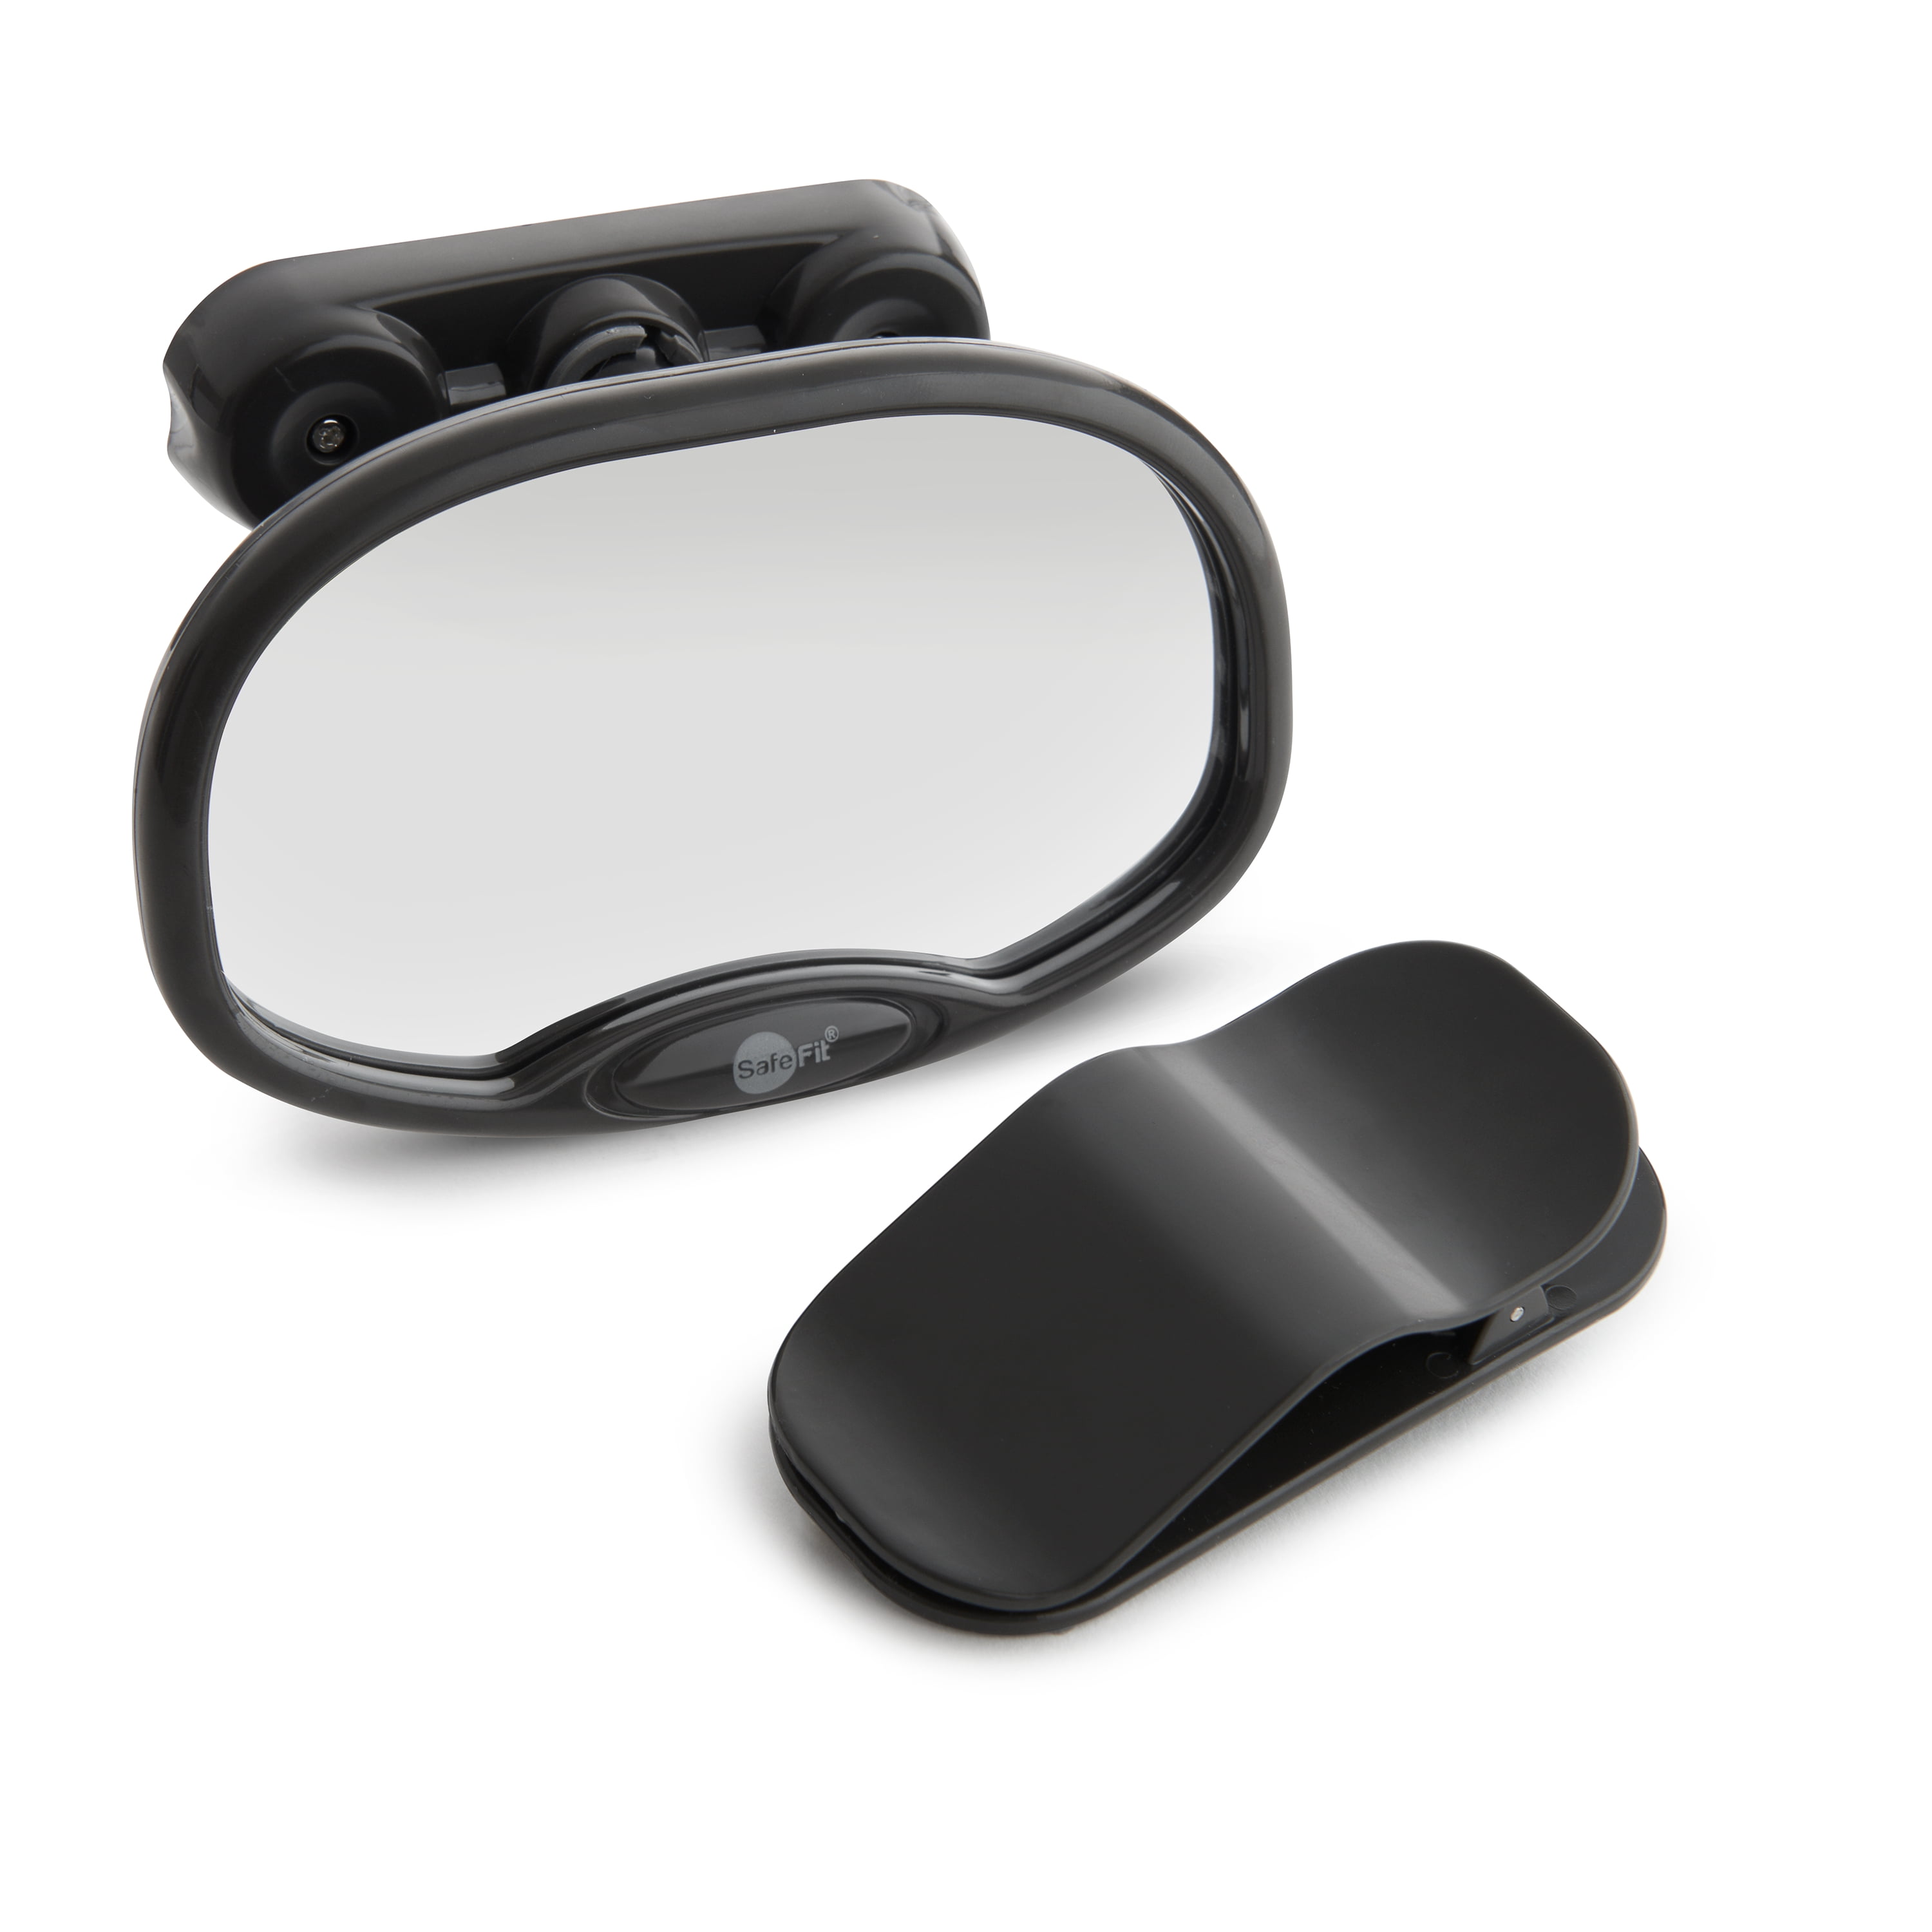 SafeFit 2-in-1 Baby Auto Mirror, Wide Angle View, Black